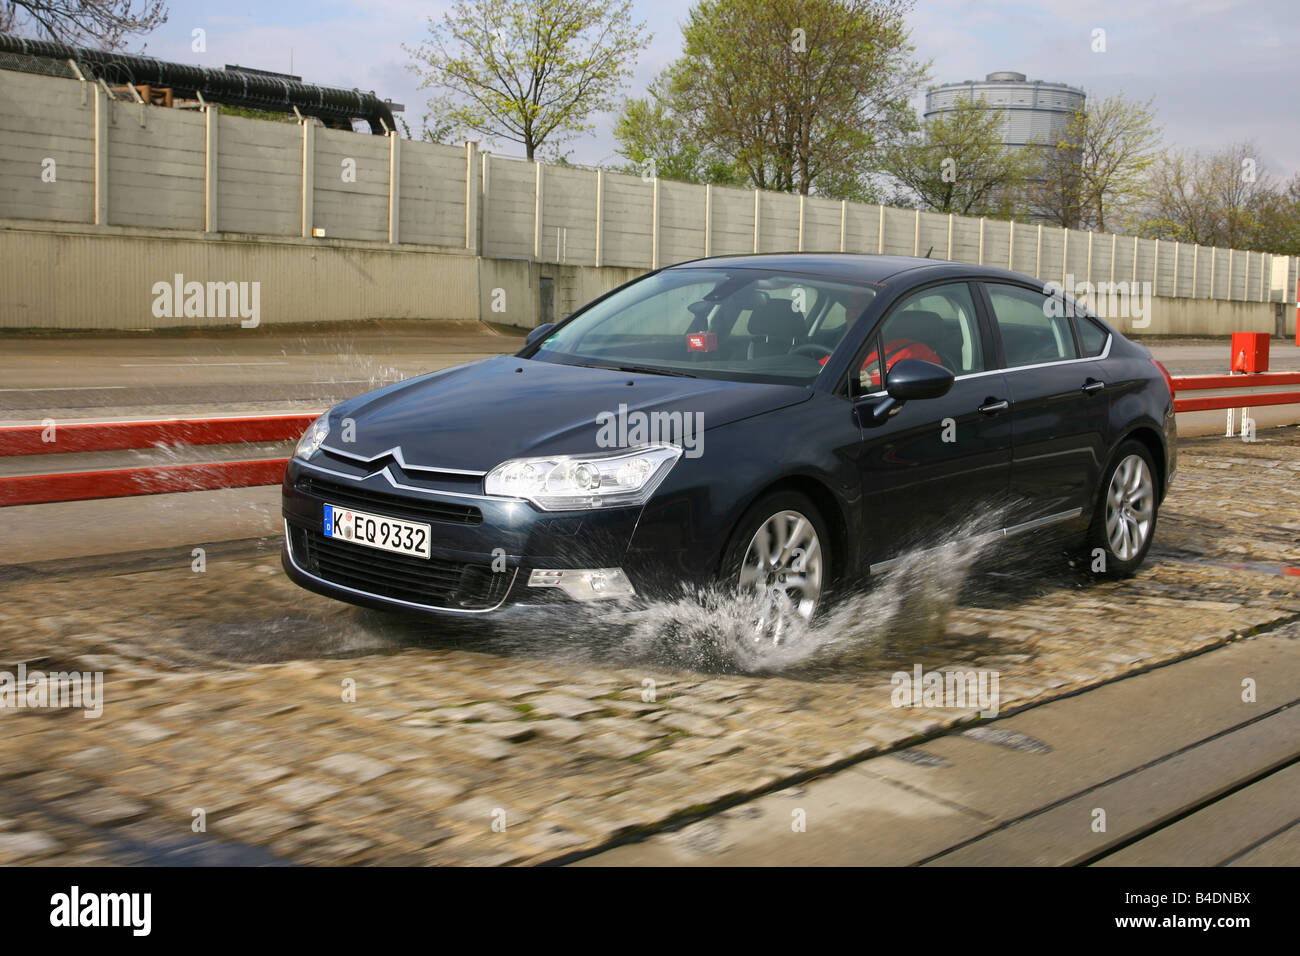 Citroen C5 V6 HDi 205 Biturbo, model year 2008-, dunkelblue moving, diagonal from the front, frontal view, test track, Water, Aq Stock Photo